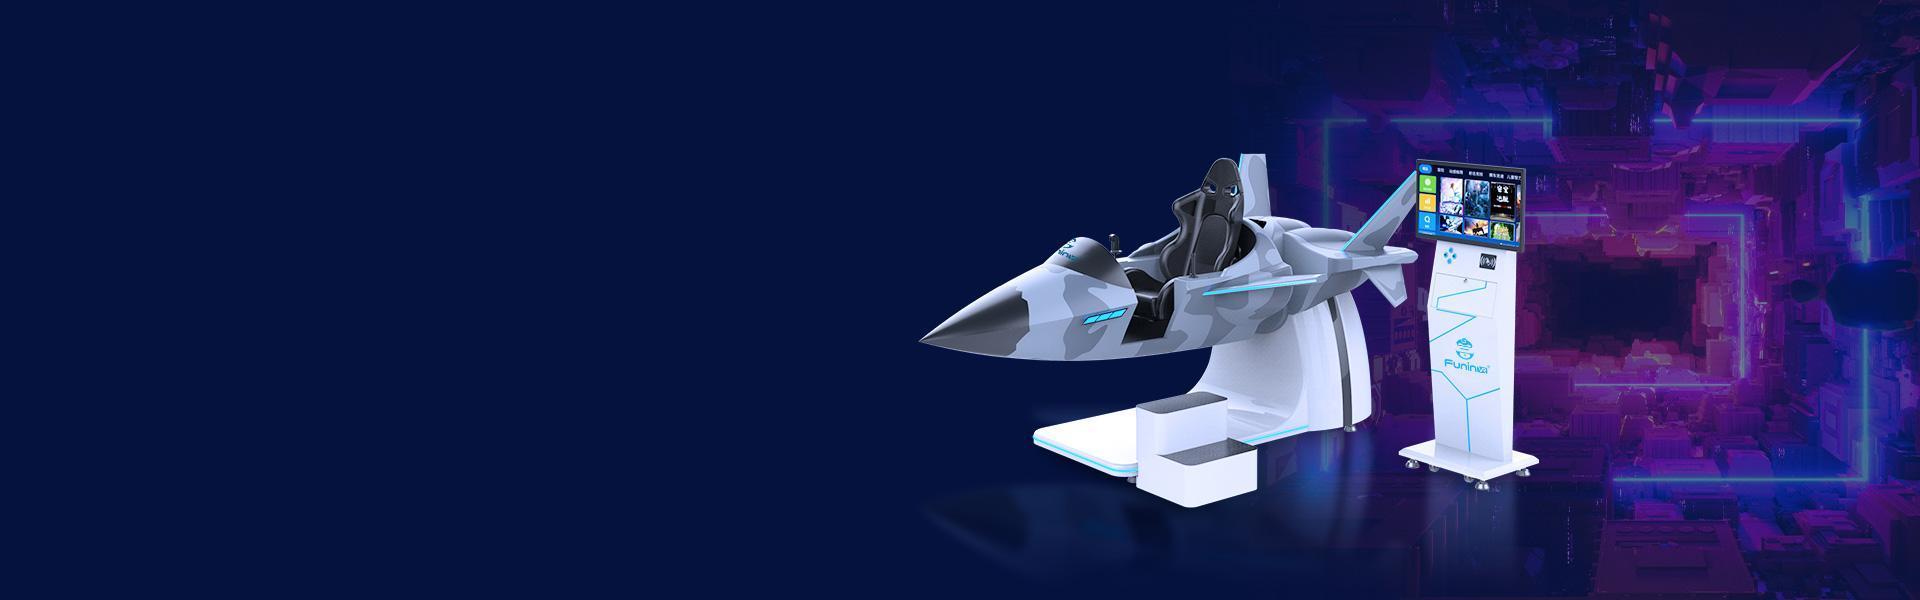 VR Fighter Aircraft